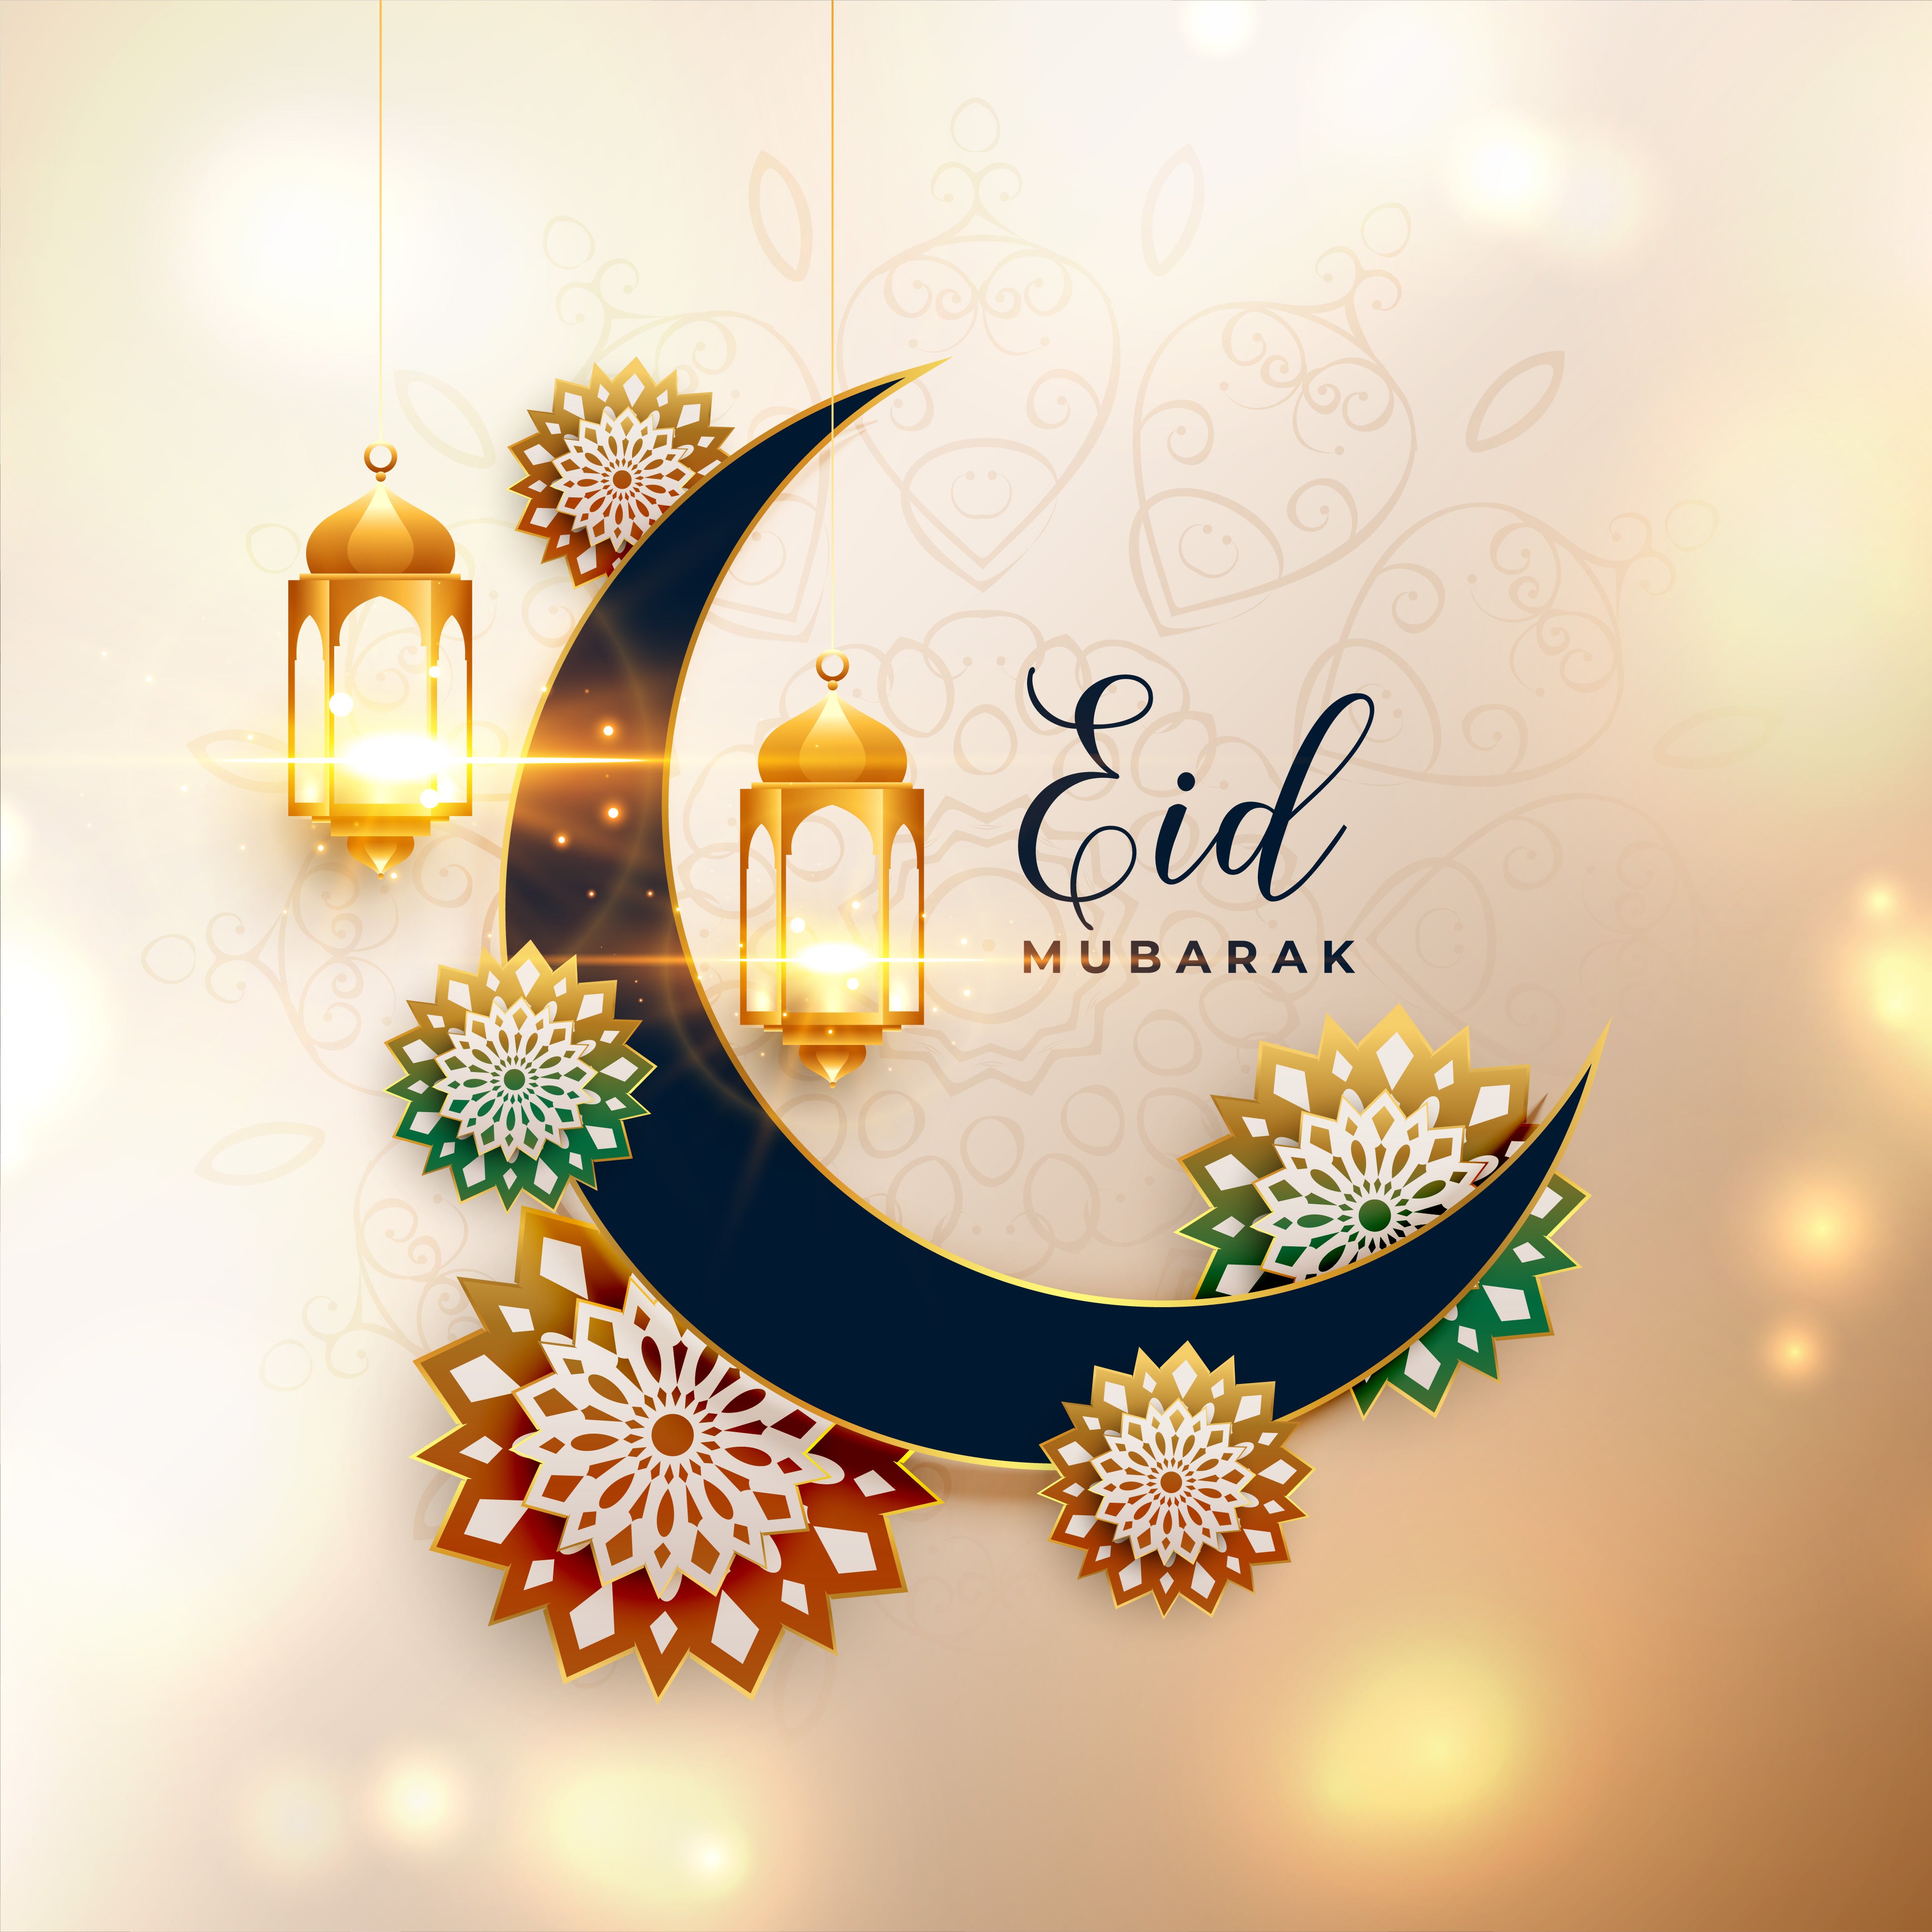 Eid Mubarak: Wishes, Quotes & Messages For Your Family & Friends